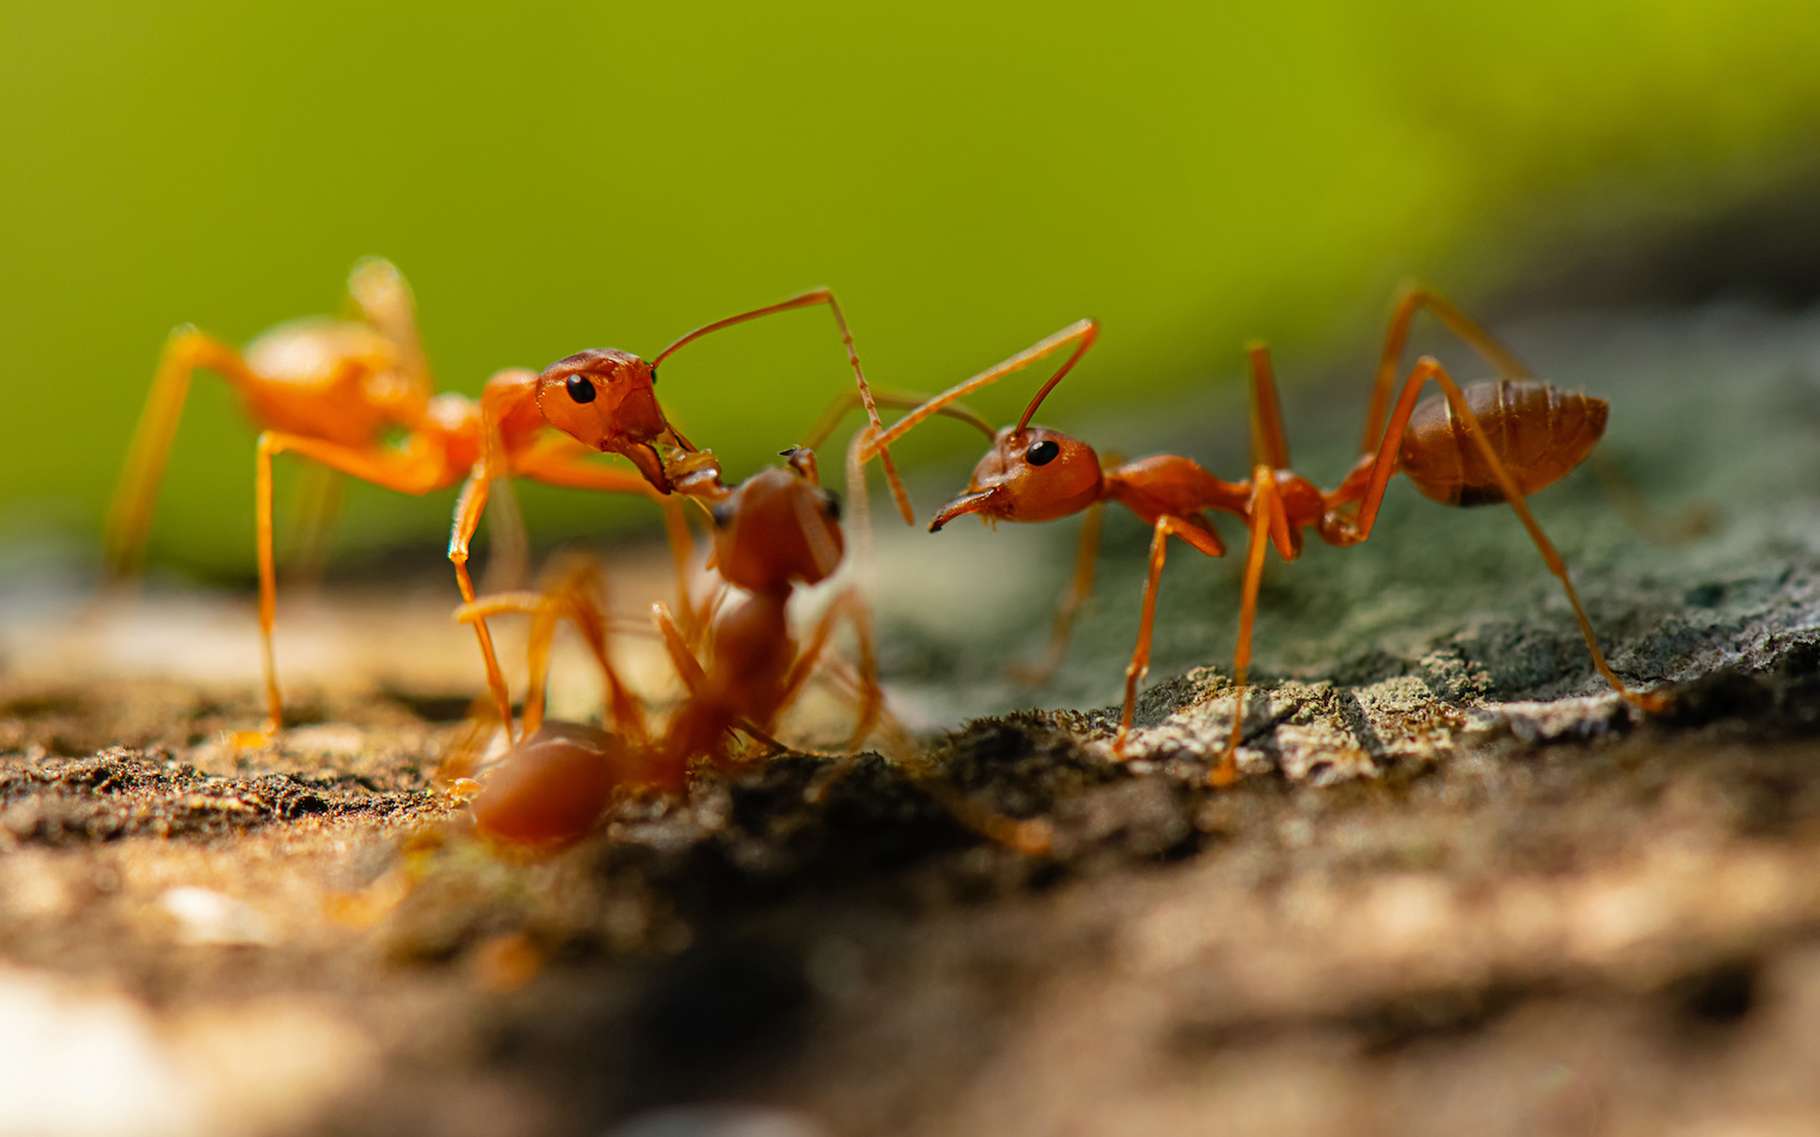 These ants show us how to build a bridge